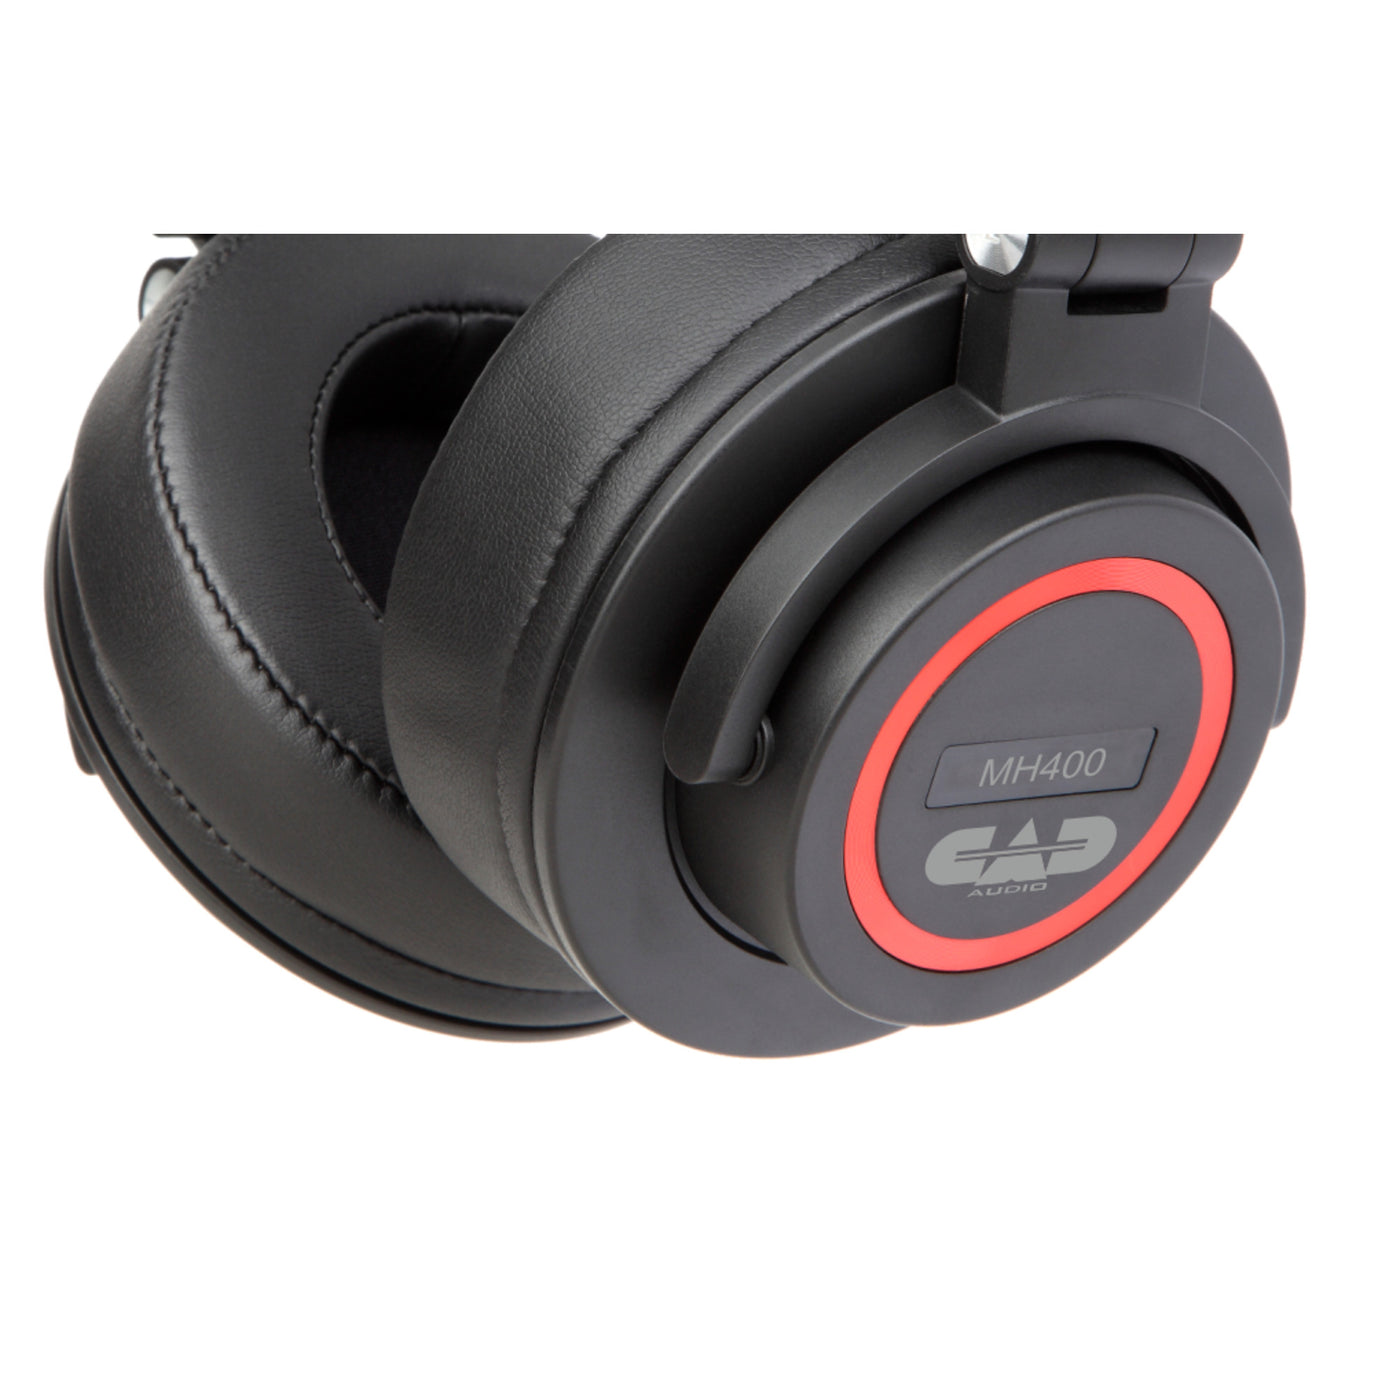 CAD Audio MH400 Closed-Back Studio Headphones with 50mm Drivers - Black (MH400)